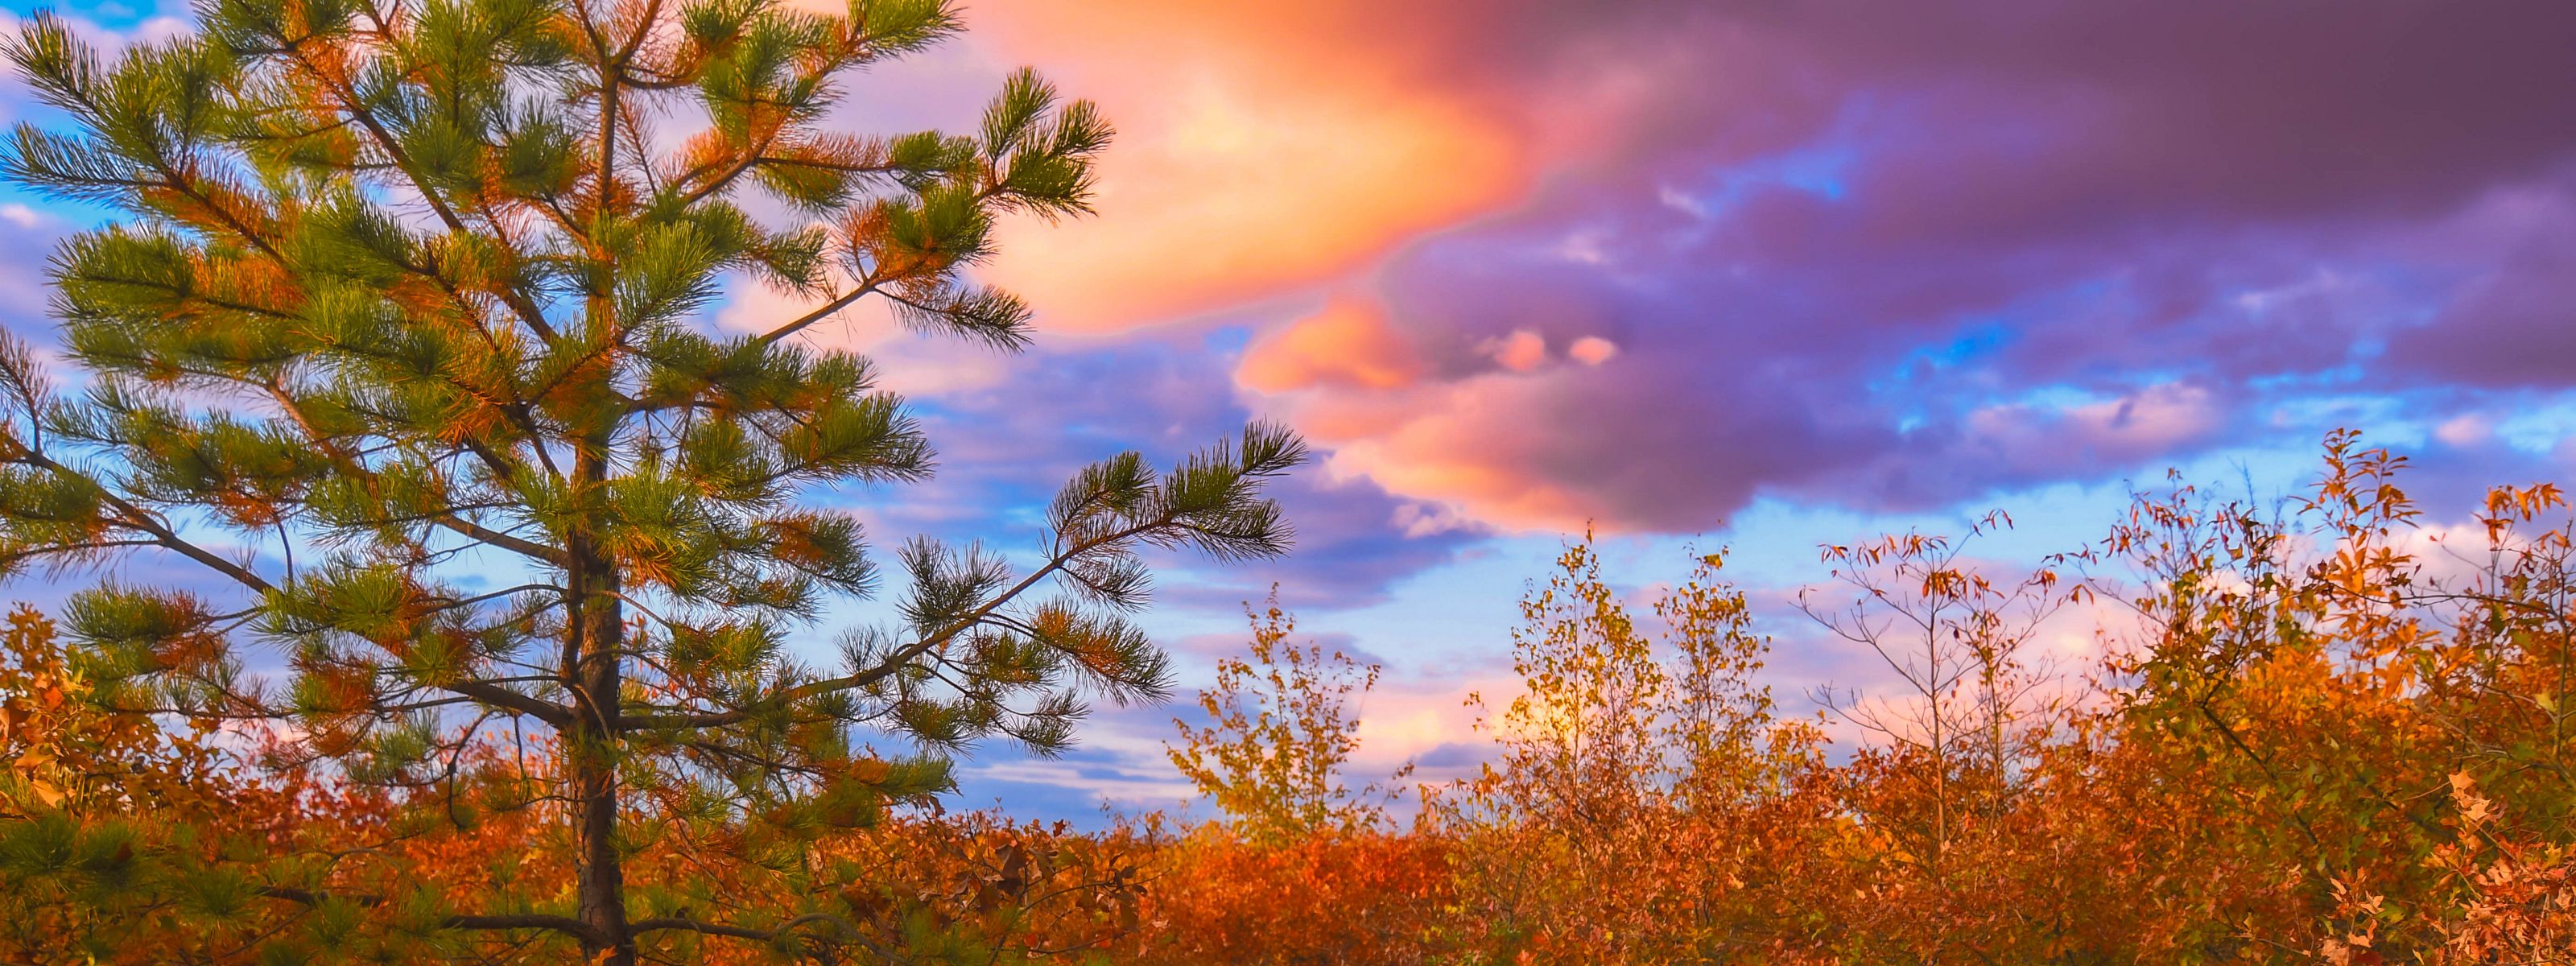 A cleared dirt path winds through a shrub and pine field. The sun sets in the background creating pink and purple clouds.